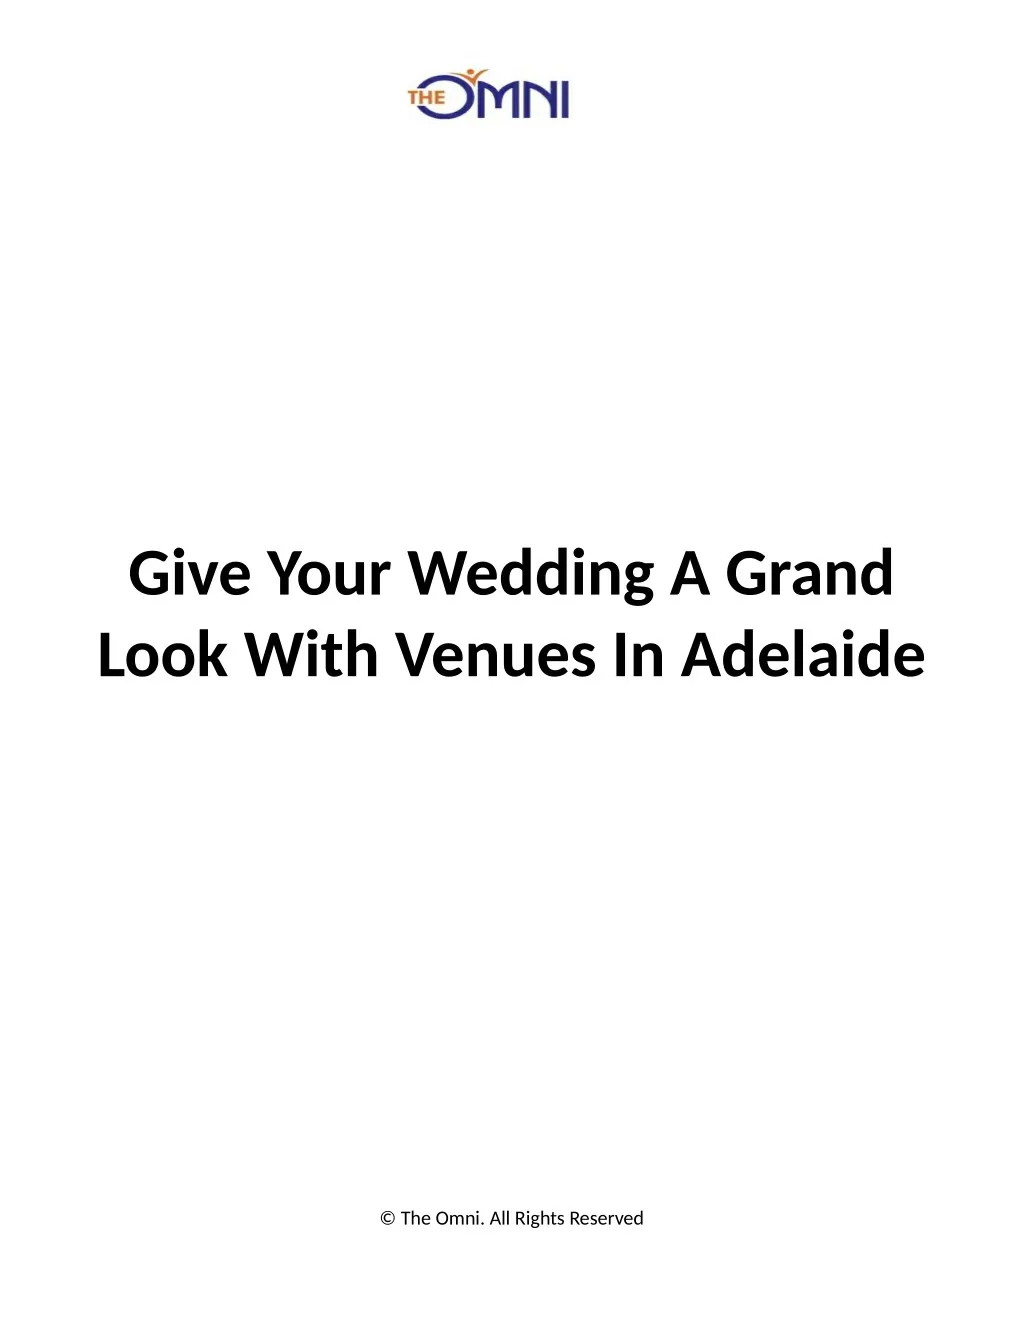 give your wedding a grand look with venues